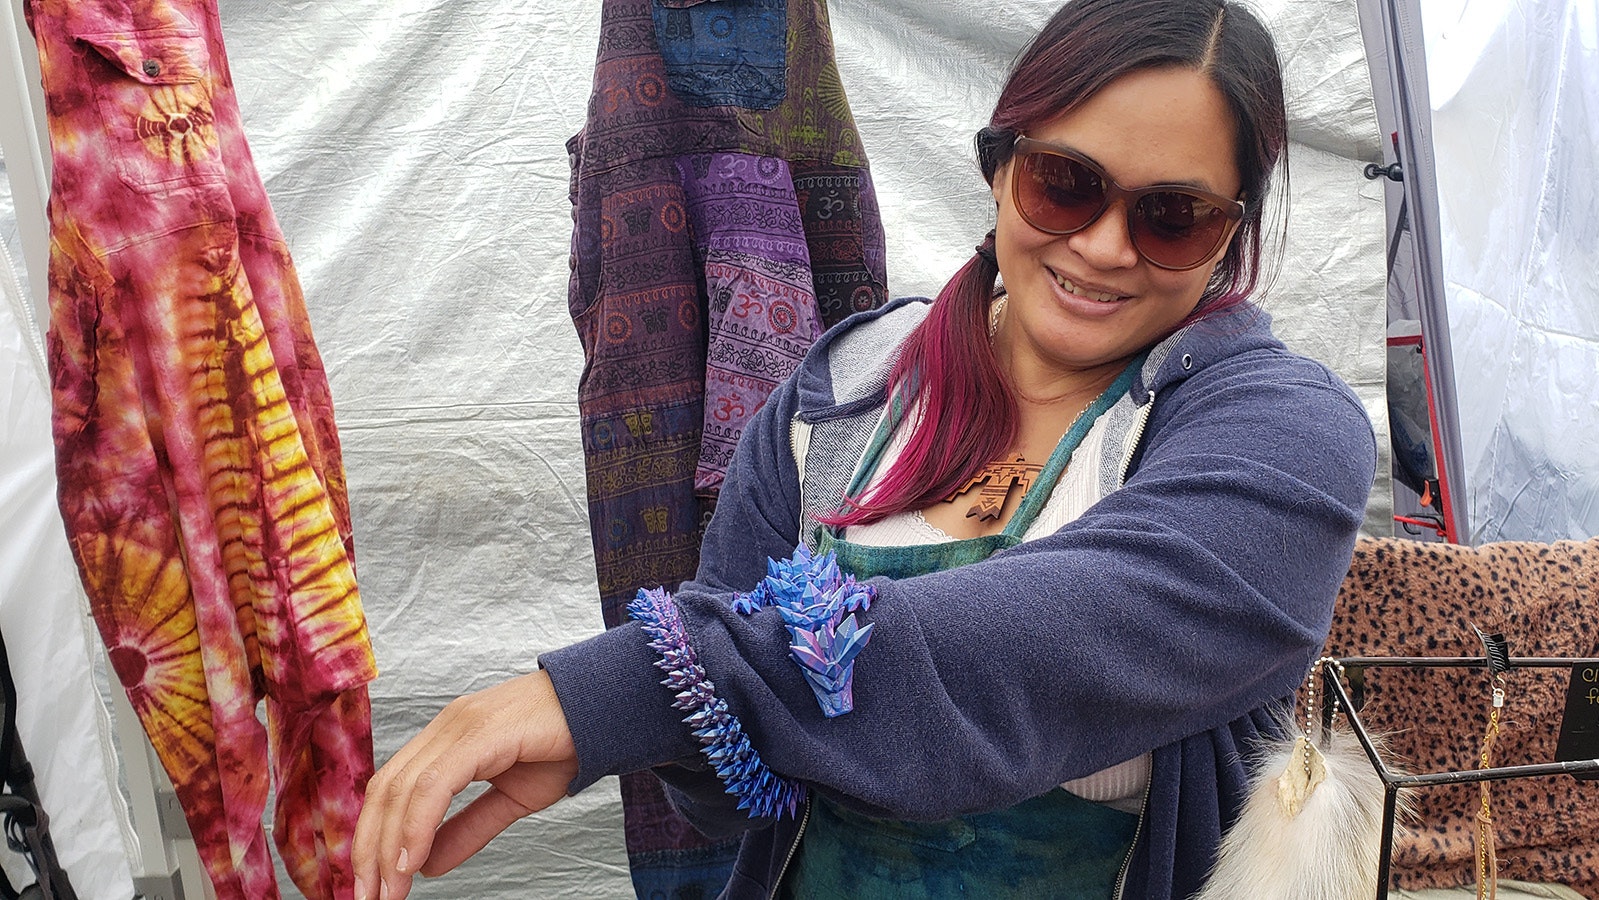 Thuvan Ahrens demonstrates how her posable 3D-printed dragons can wrap around an arm looking almost like a pet. She was part of an army of vendors with hand crafted wares for sale at the Beartrap Summer Festival.